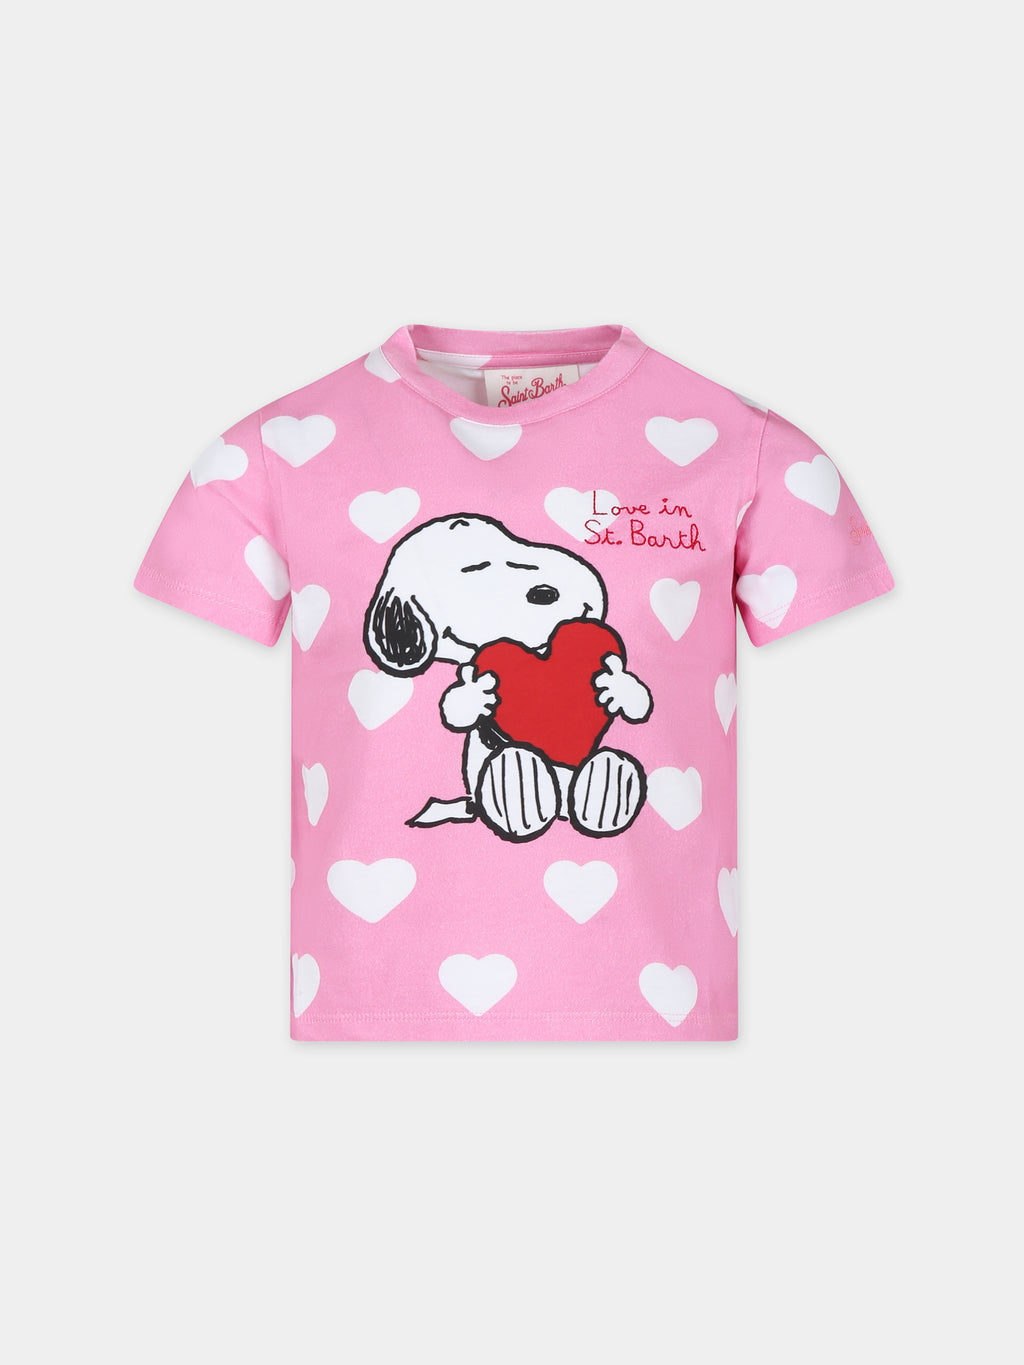 Pink t-shirt for girl with Snoopy print and hearts